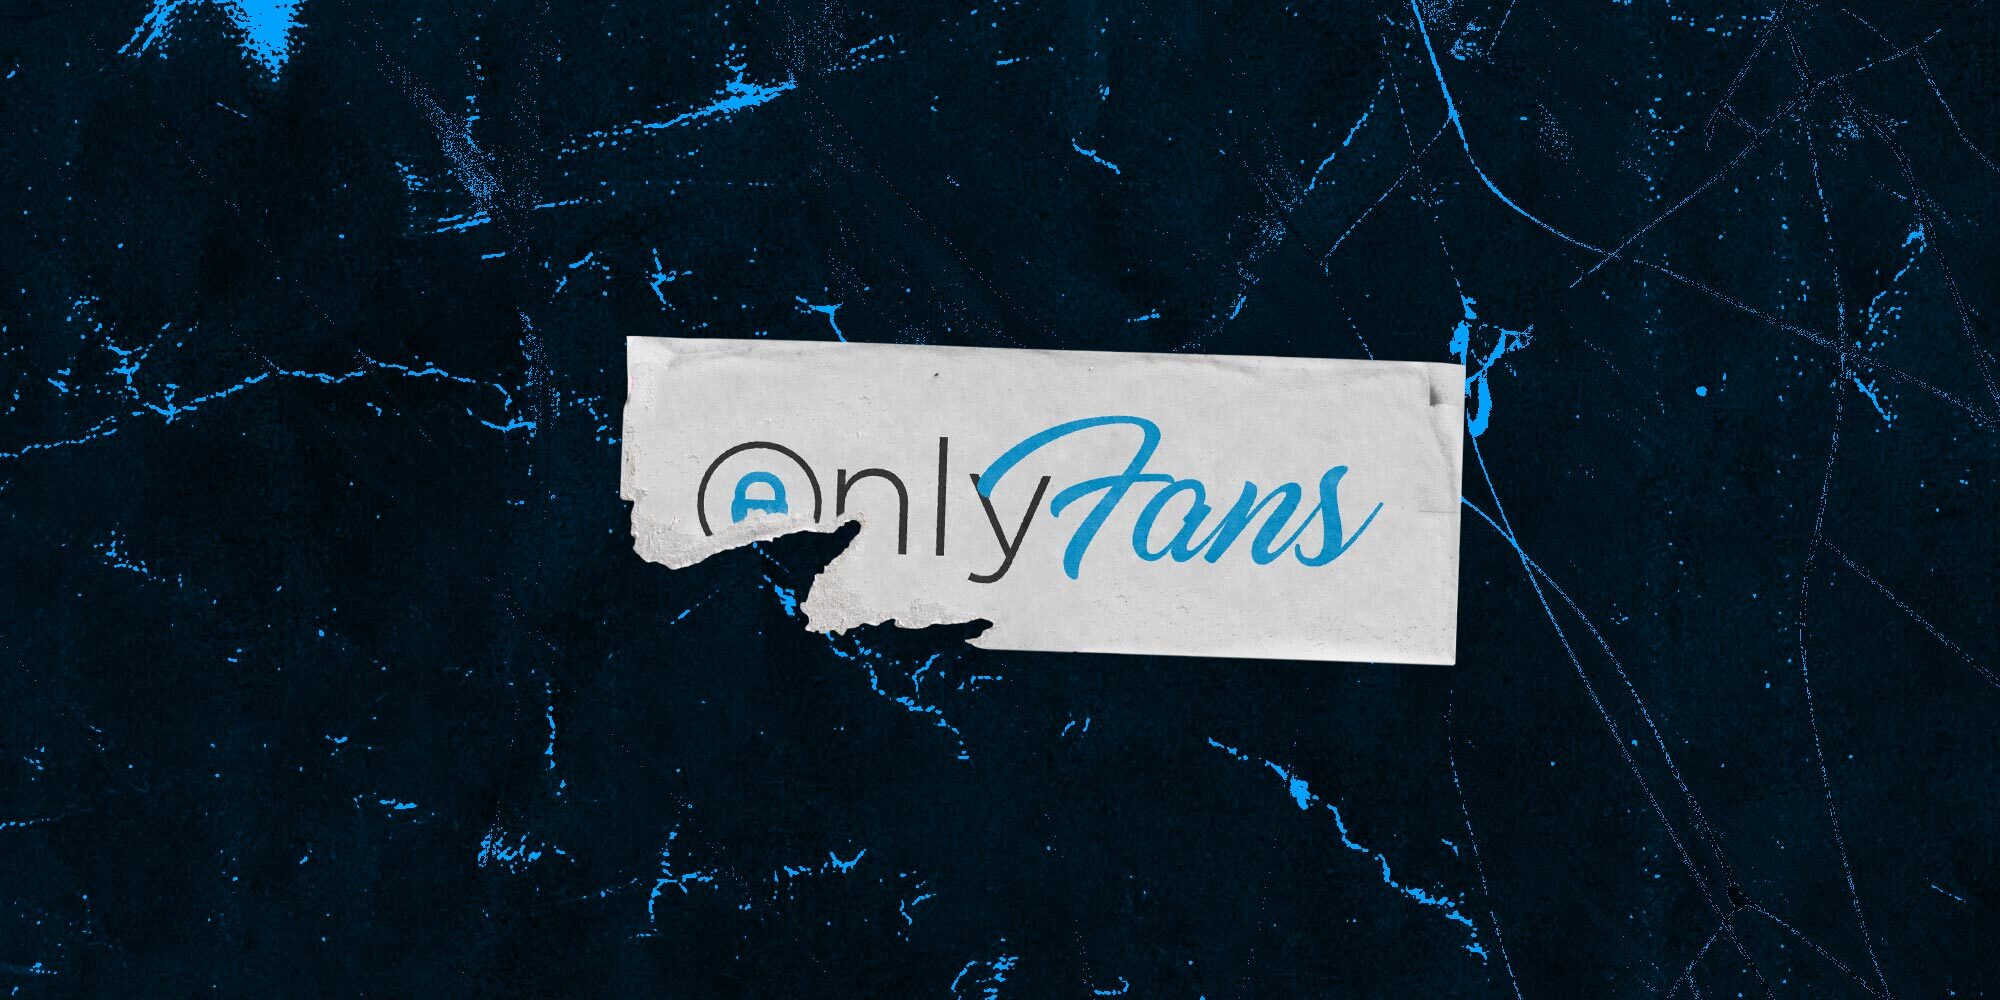 OnlyFans Reportedly has Lax Moderation and Underage Content, BBC  Investigation Finds